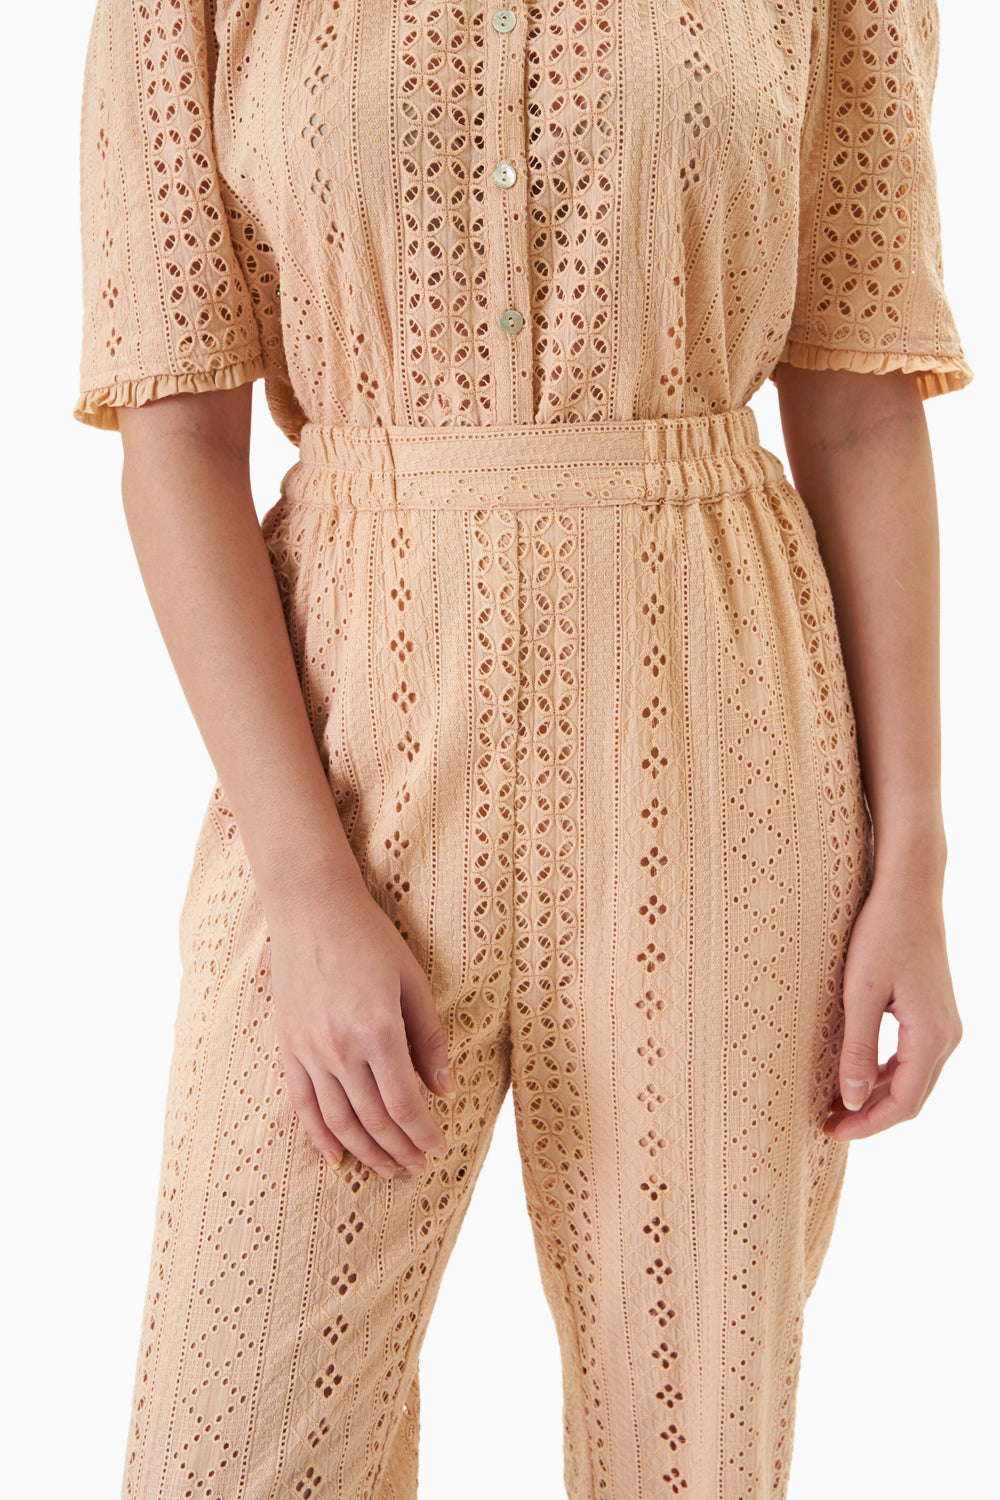 The Dainty Delilah Co-Ord